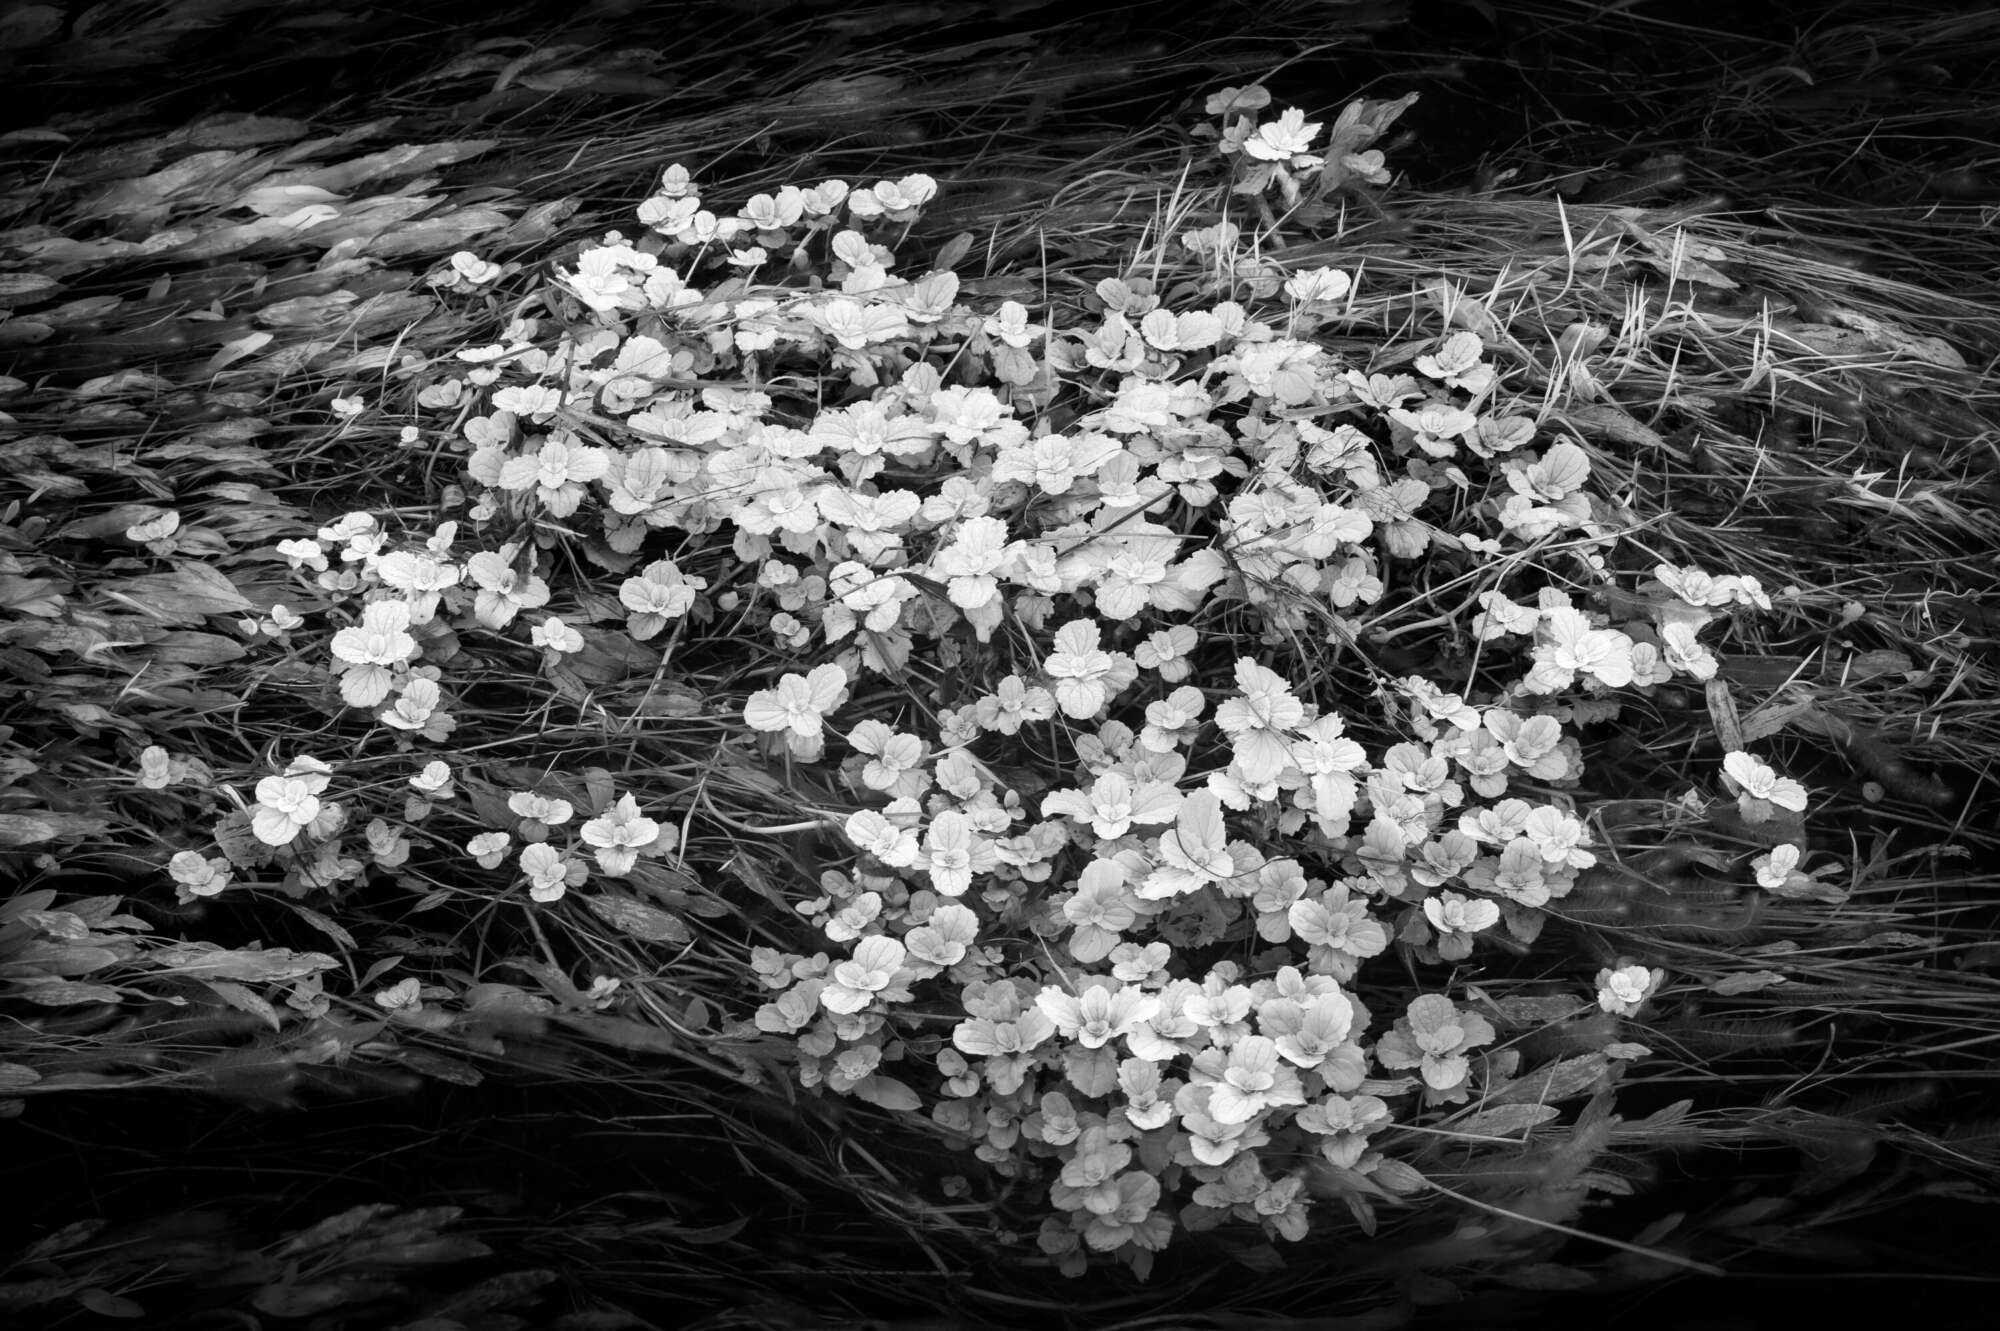 River Plant Study in Infrared by paul gallagher aspect2i